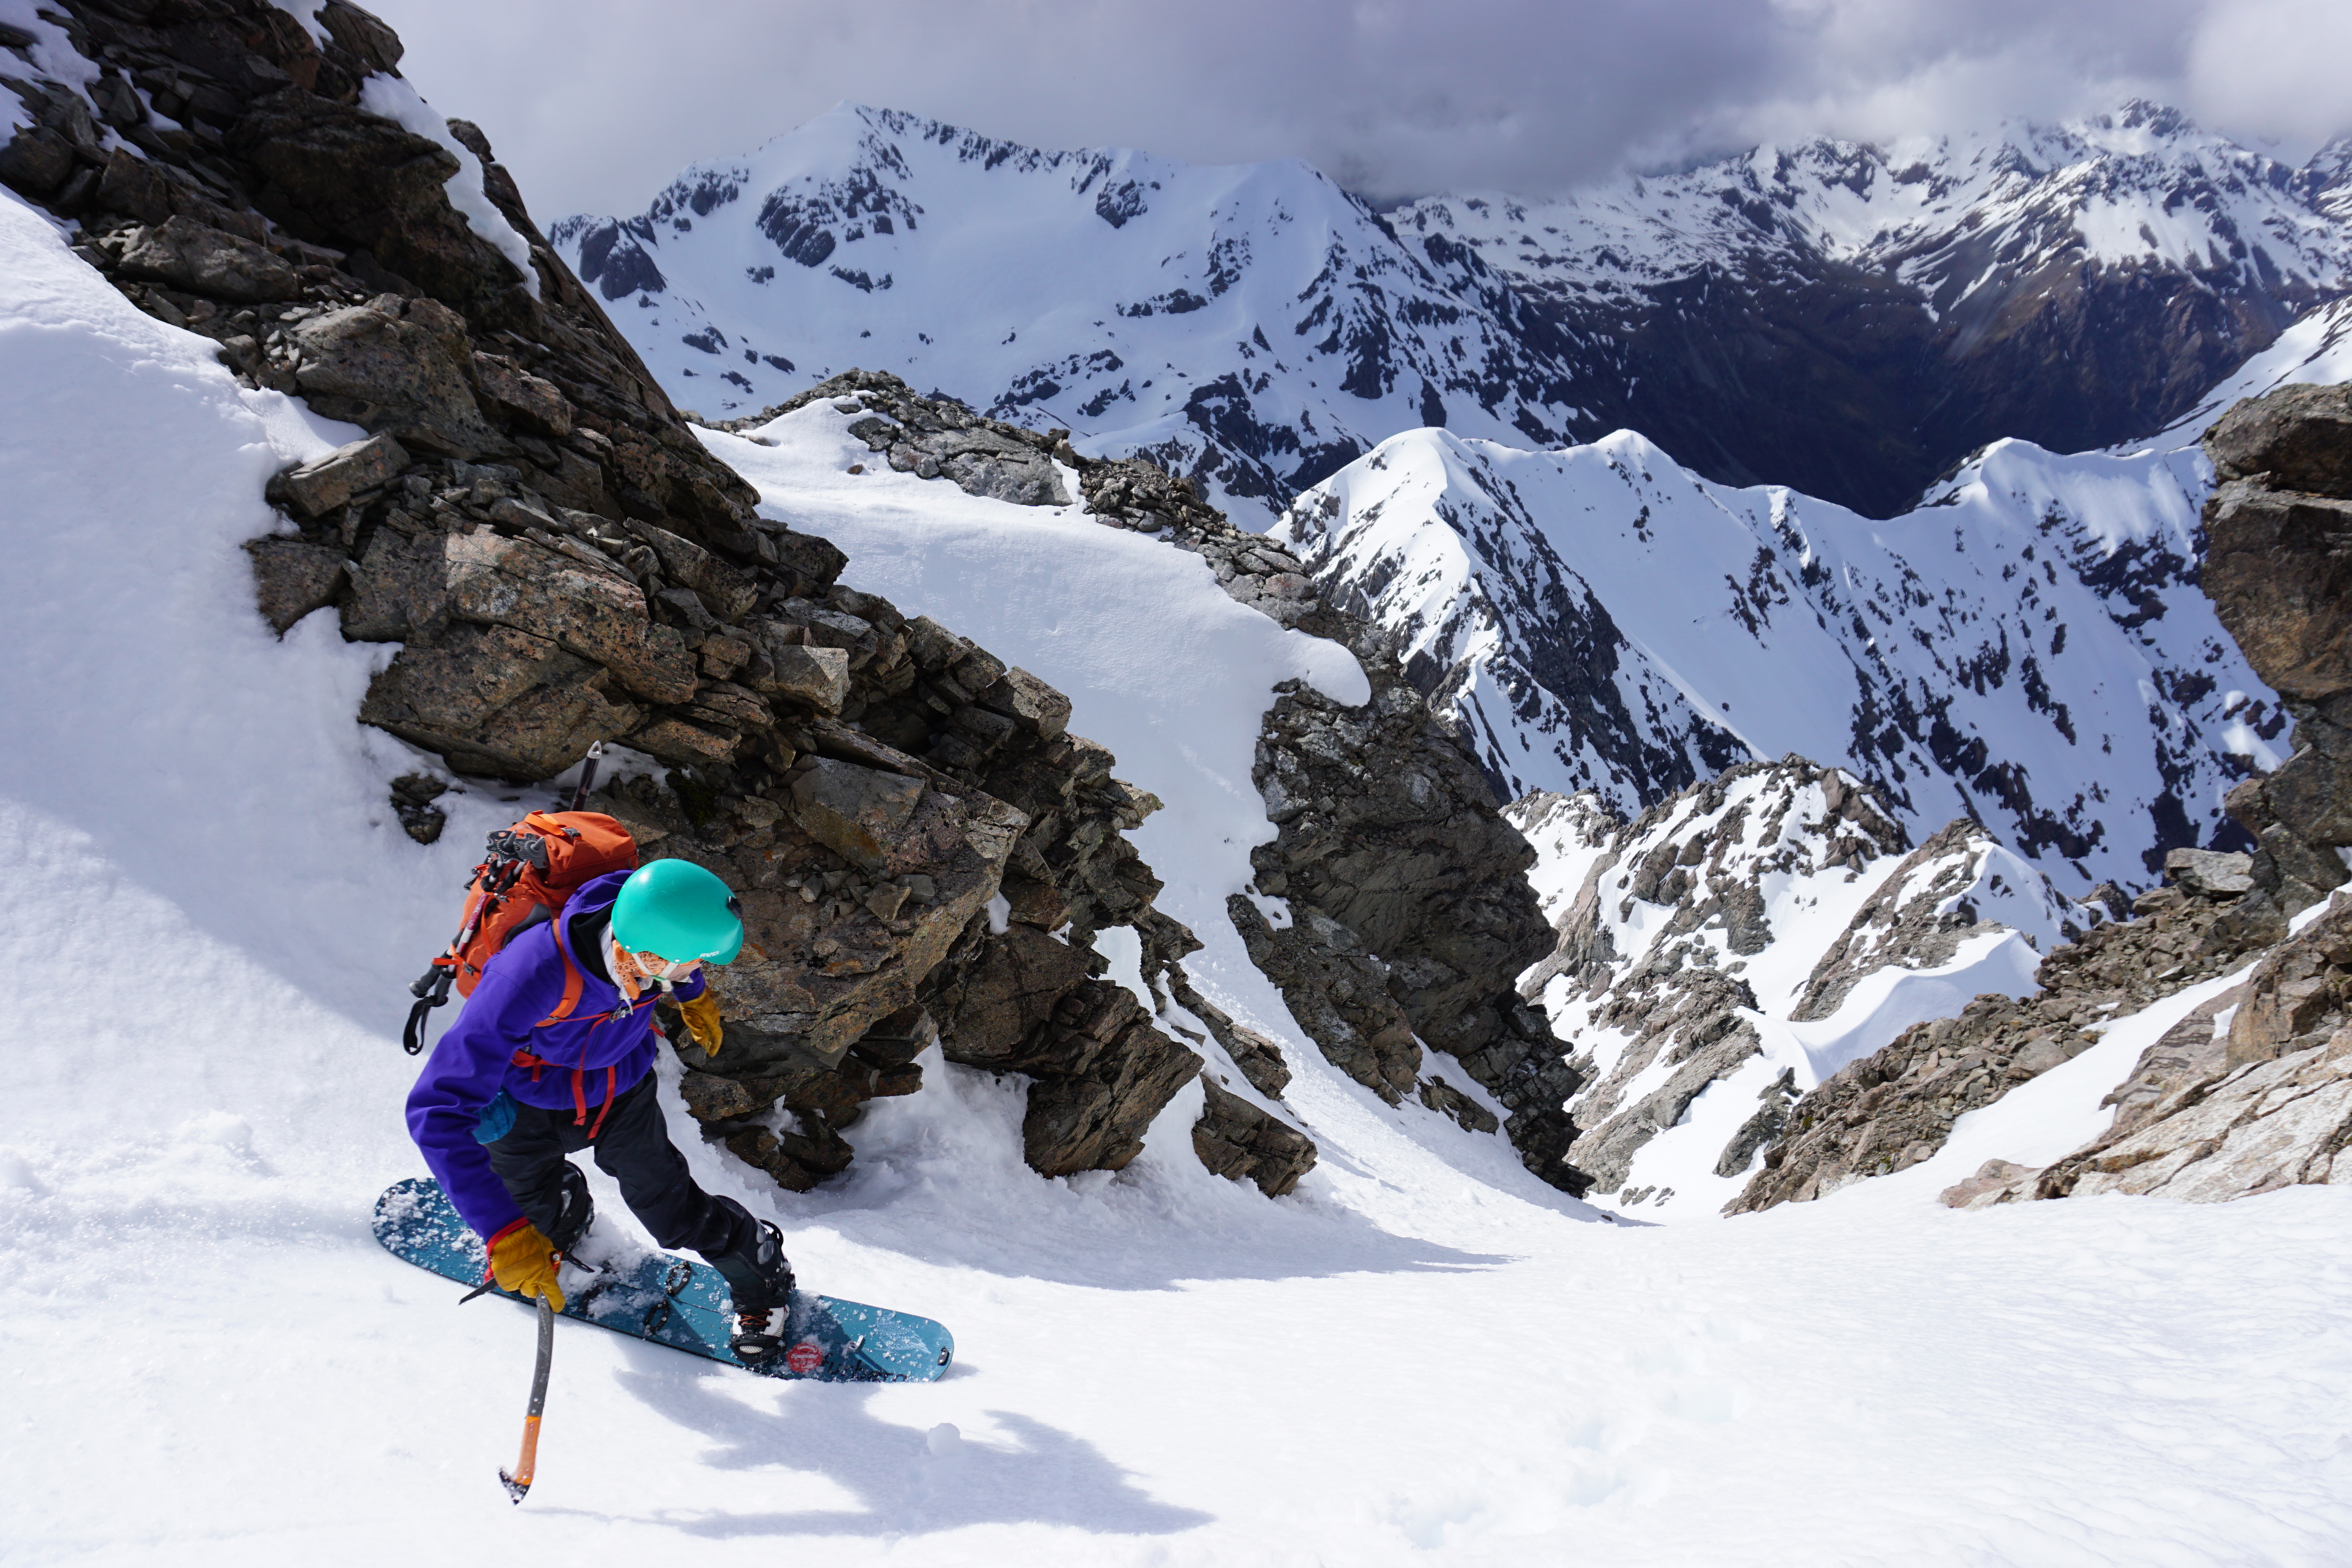 Ski touring Armstrong, Rollestons high peak and Philistine in the Arthurs Pass National Park Backcountry